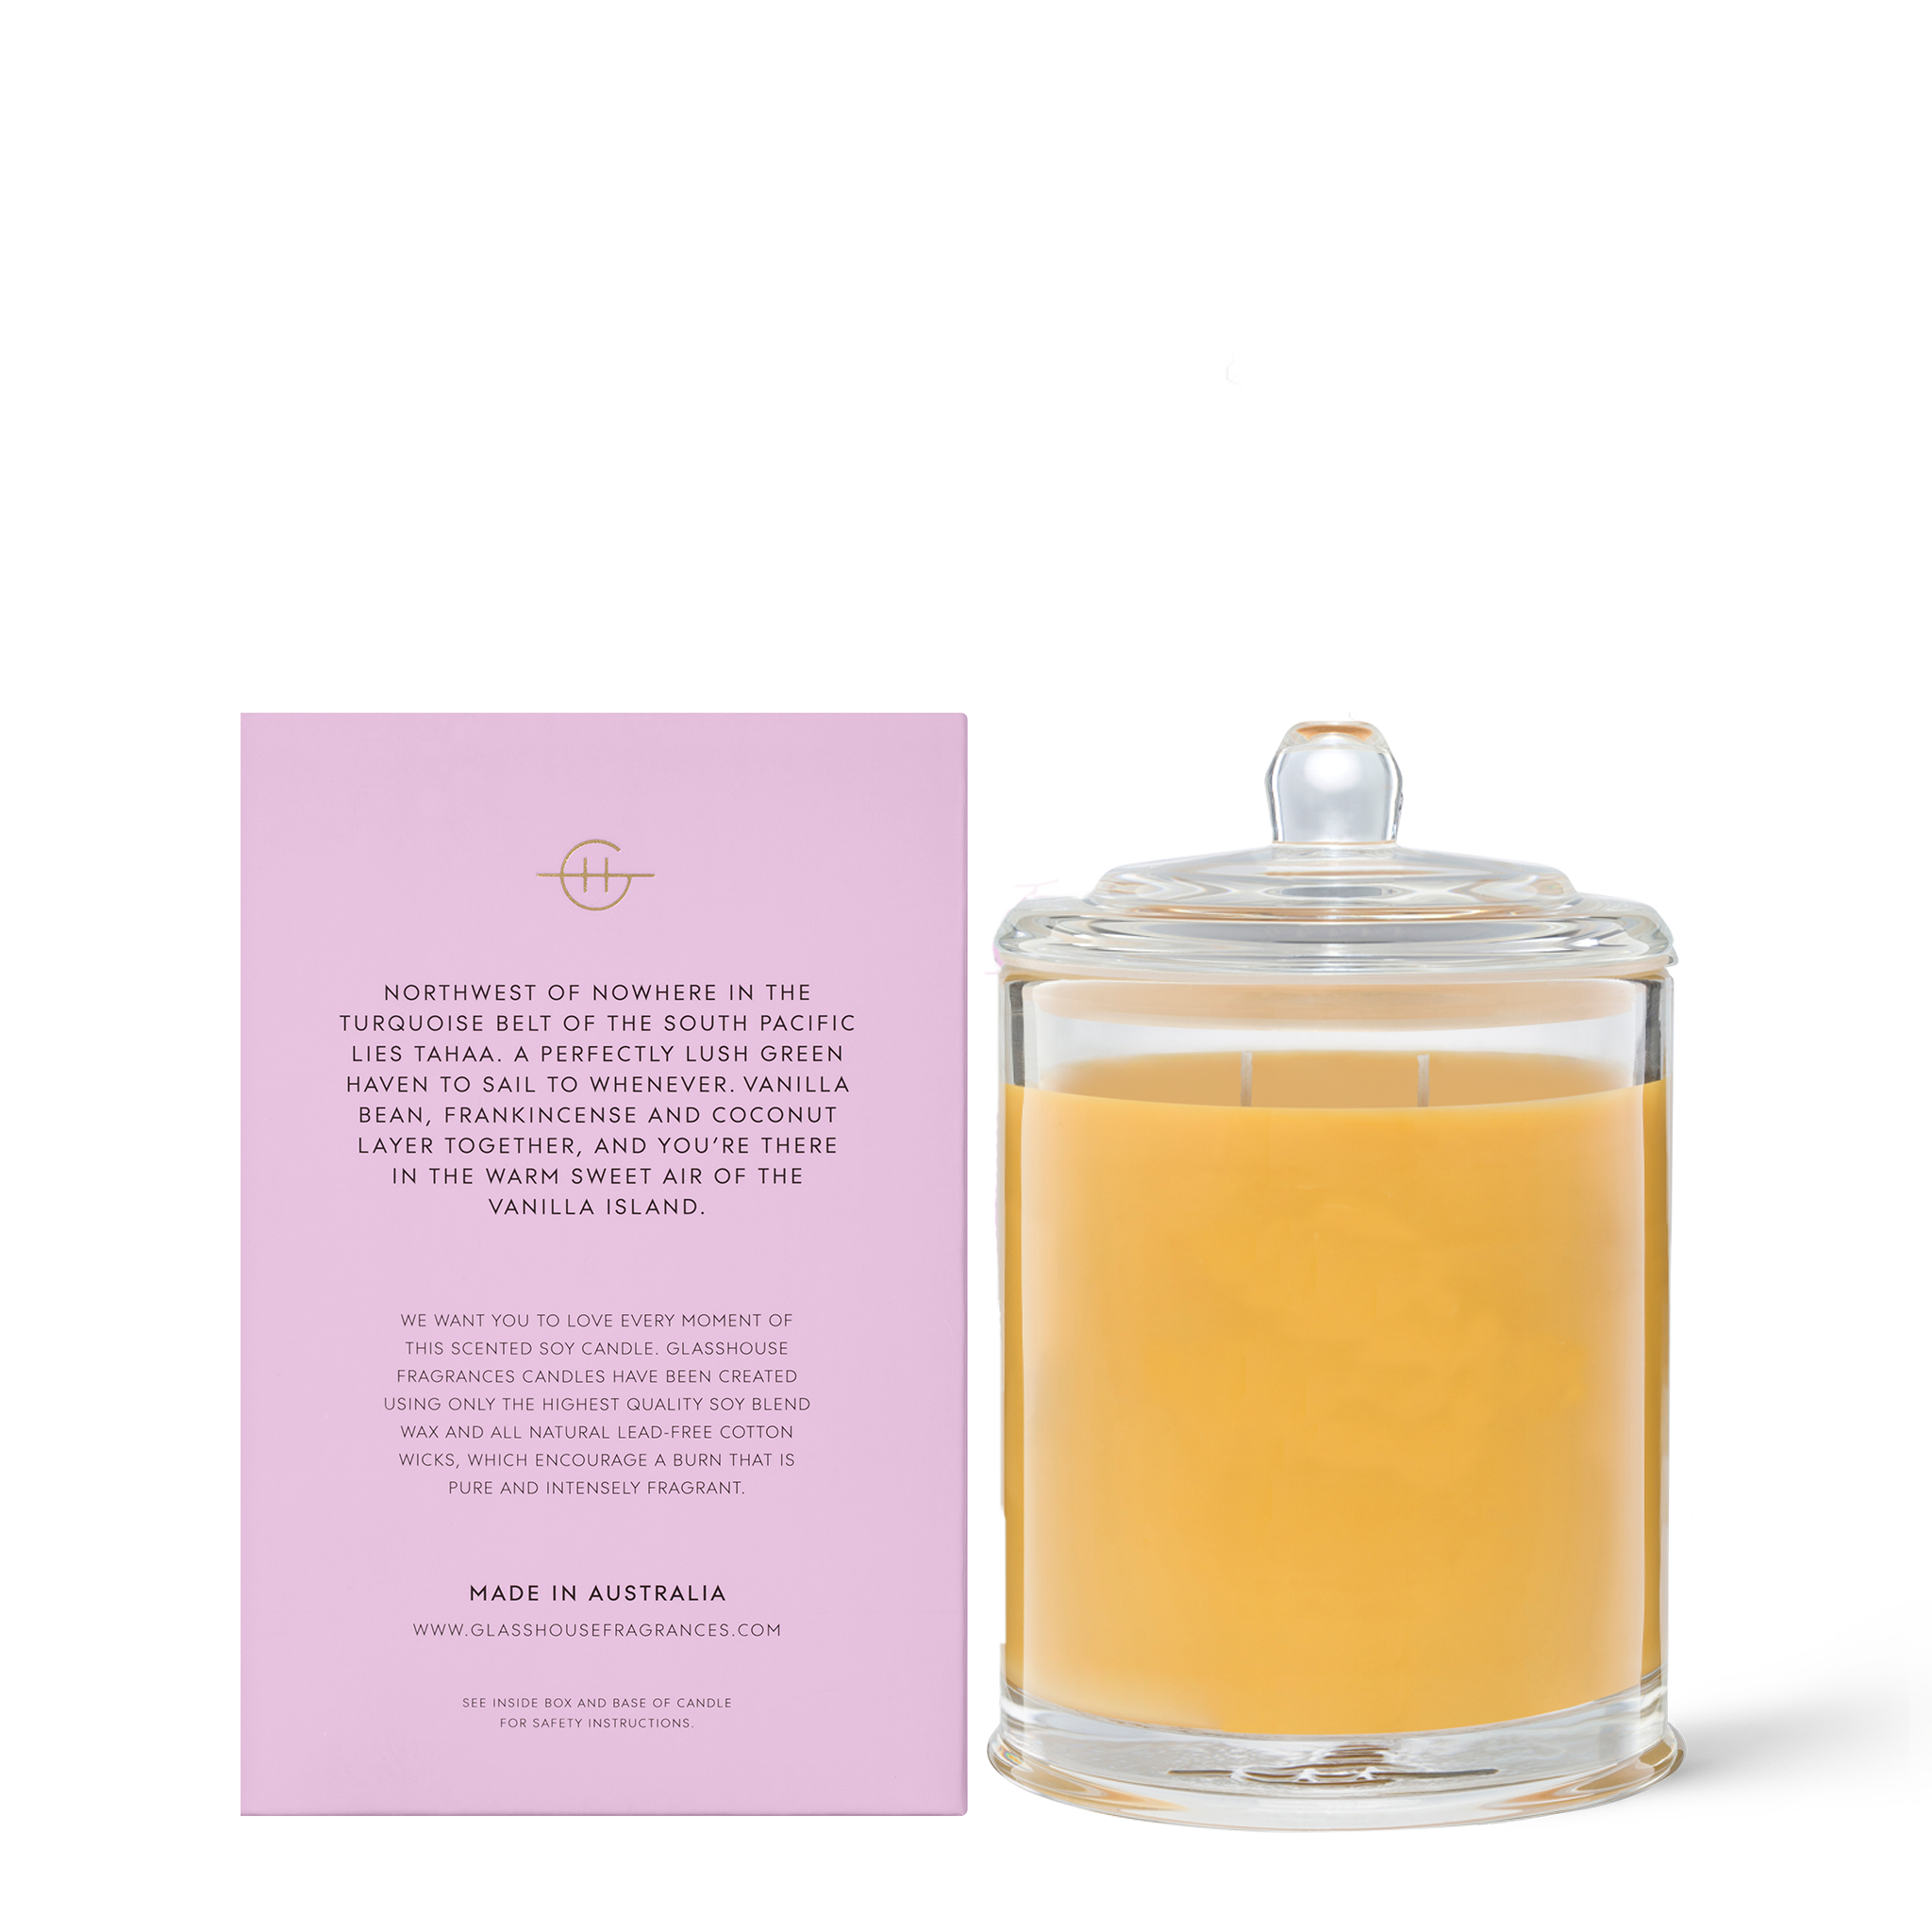 Glasshouse Fragrances A Tahaa Affair Vanilla Caramel 380g Soy Candle with box - back of product shot